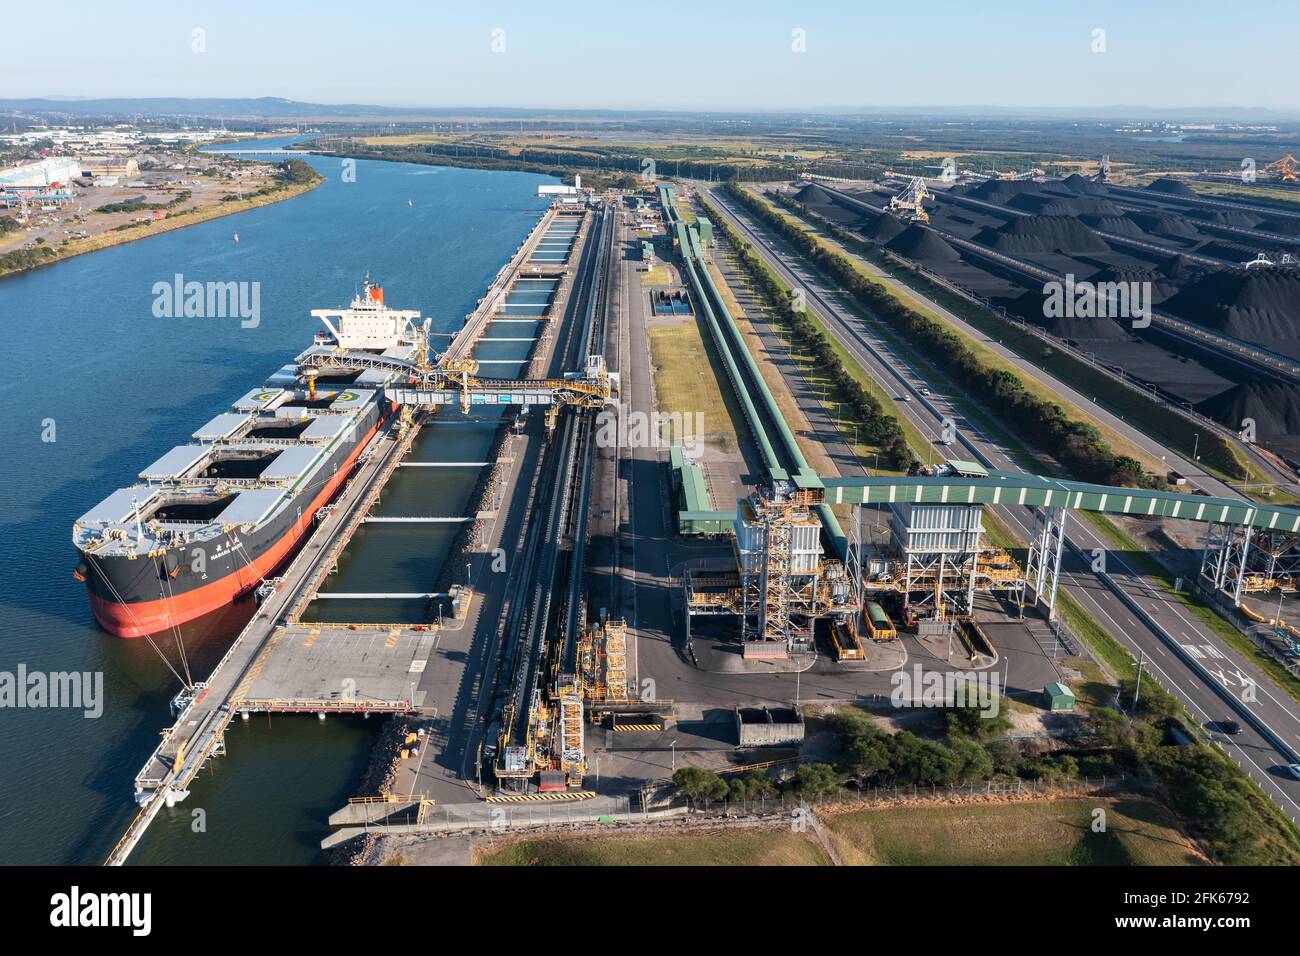 25 April 2021 - Newcastle, NSW, Australia. Aerial view of Japanese bulk carrier NAGARA MARU being loaded with coal and coal loading structures. Stock Photo